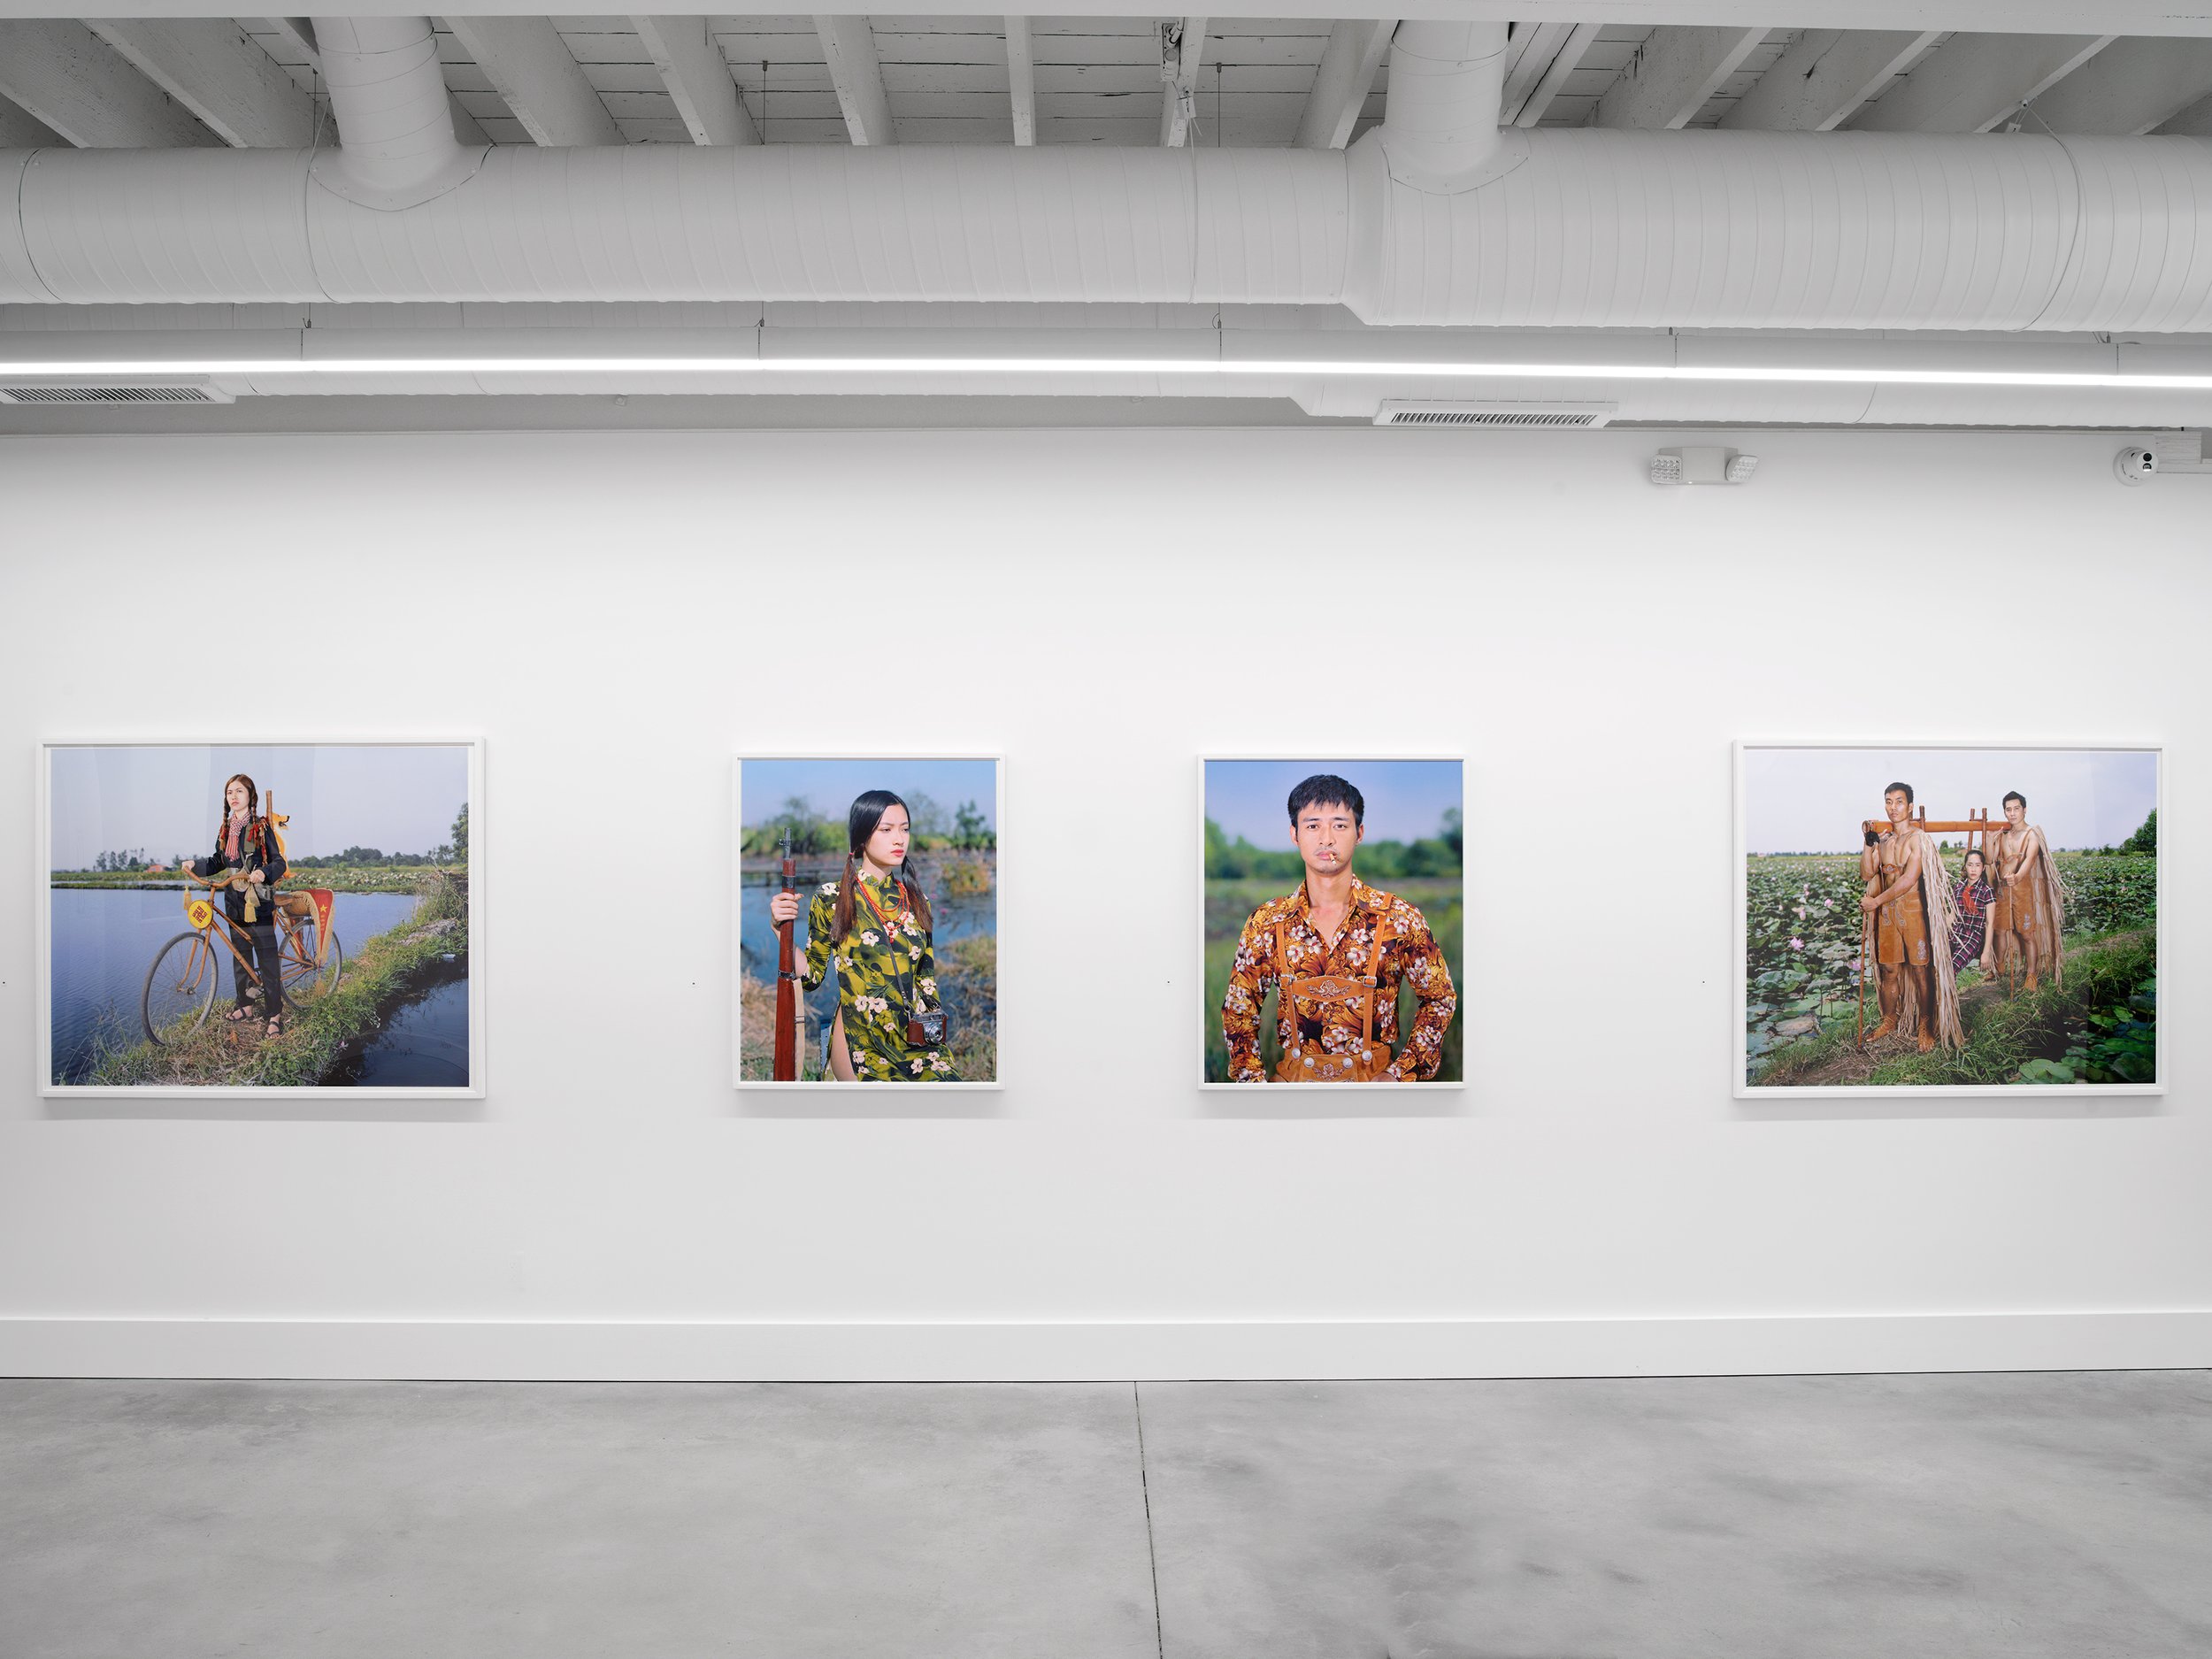  Installation view of Olivier Laude:    Chiến Thắng Ba Tơ  left to right:  Chiến Thắng Ba Tơ, Sis{Quynh}, Linh, Cáng  